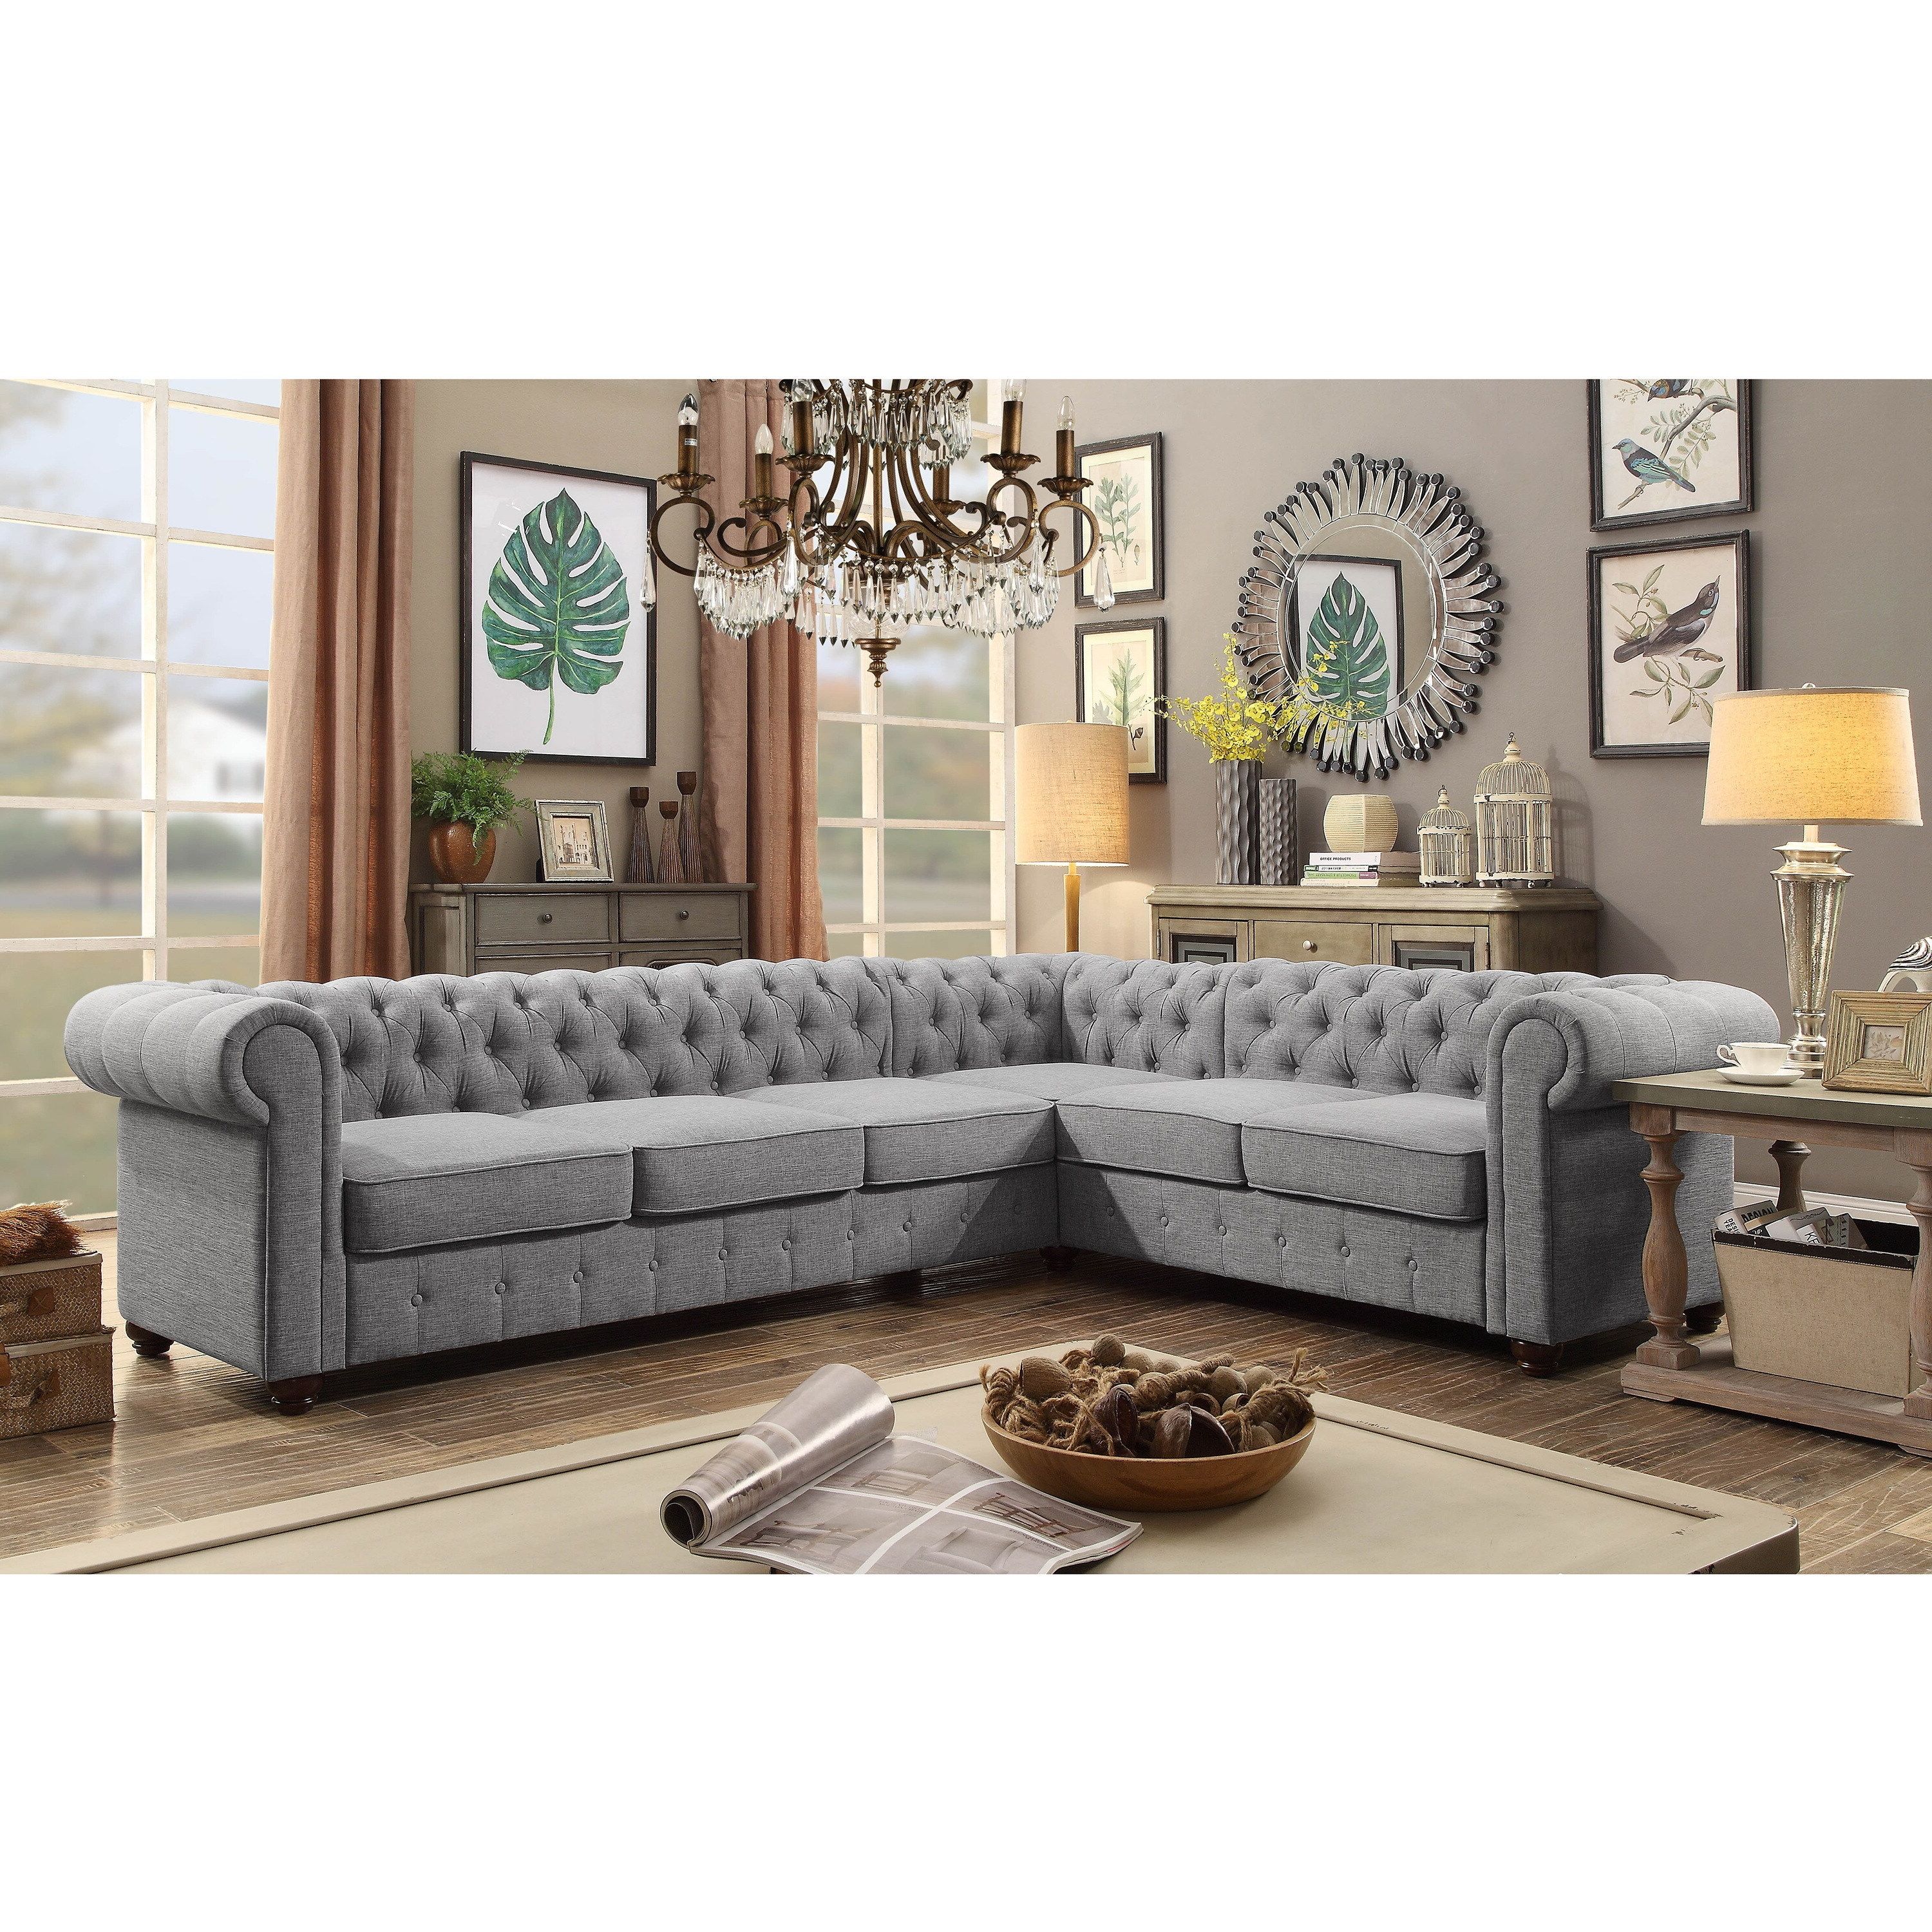 Moser Bay Garcia Furniture Linen 6 Seat Sectional Sofa Set – On Sale – –  12033154 Within 6 Seater Sectional Couches (Gallery 10 of 20)